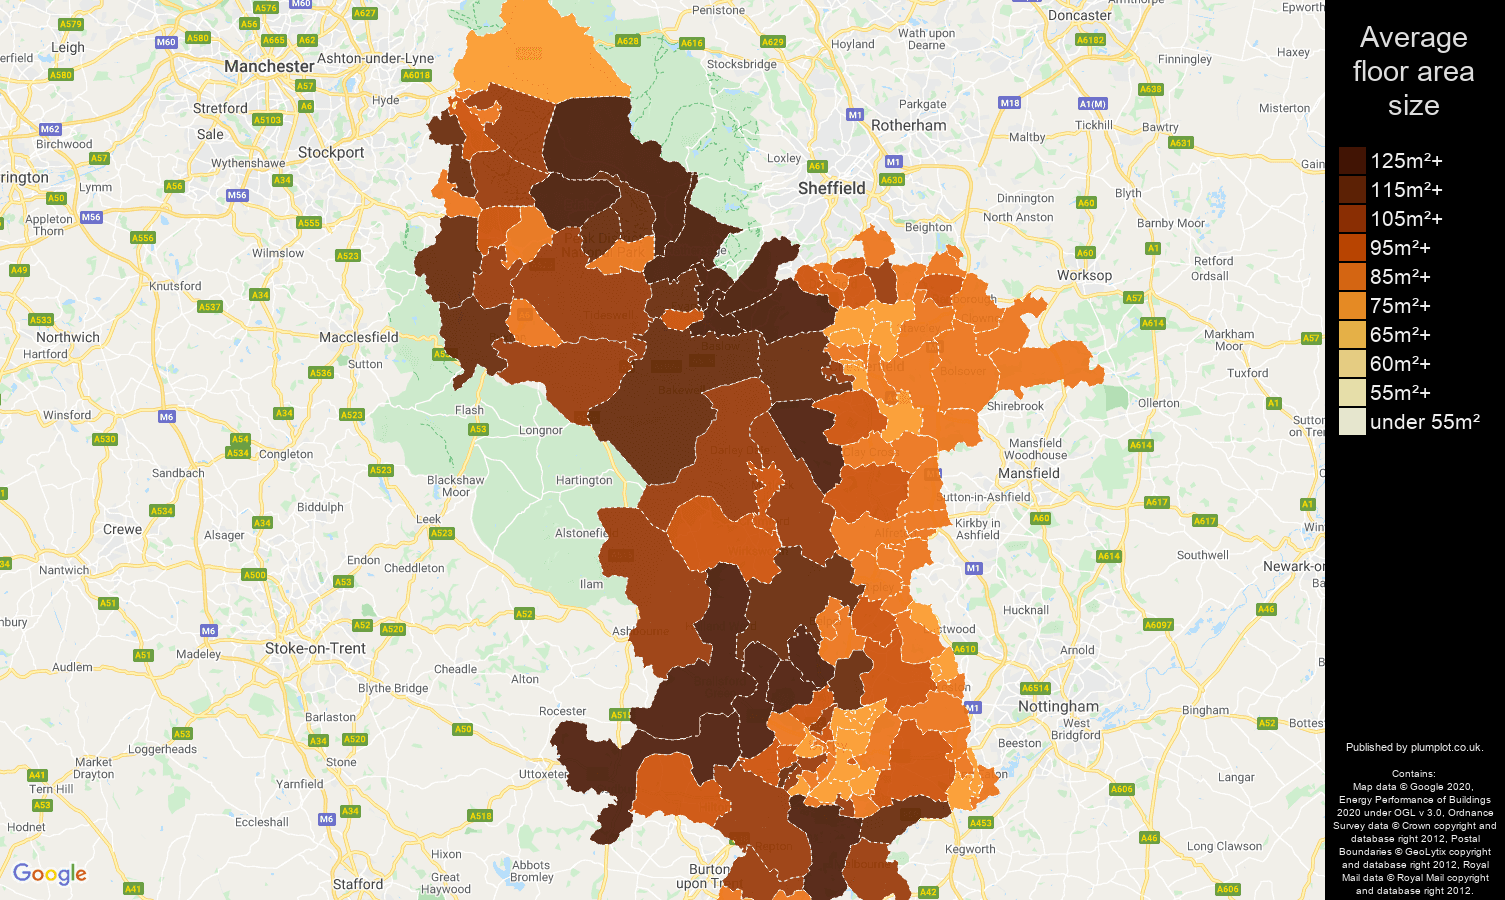 Derbyshire map of average floor area size of houses